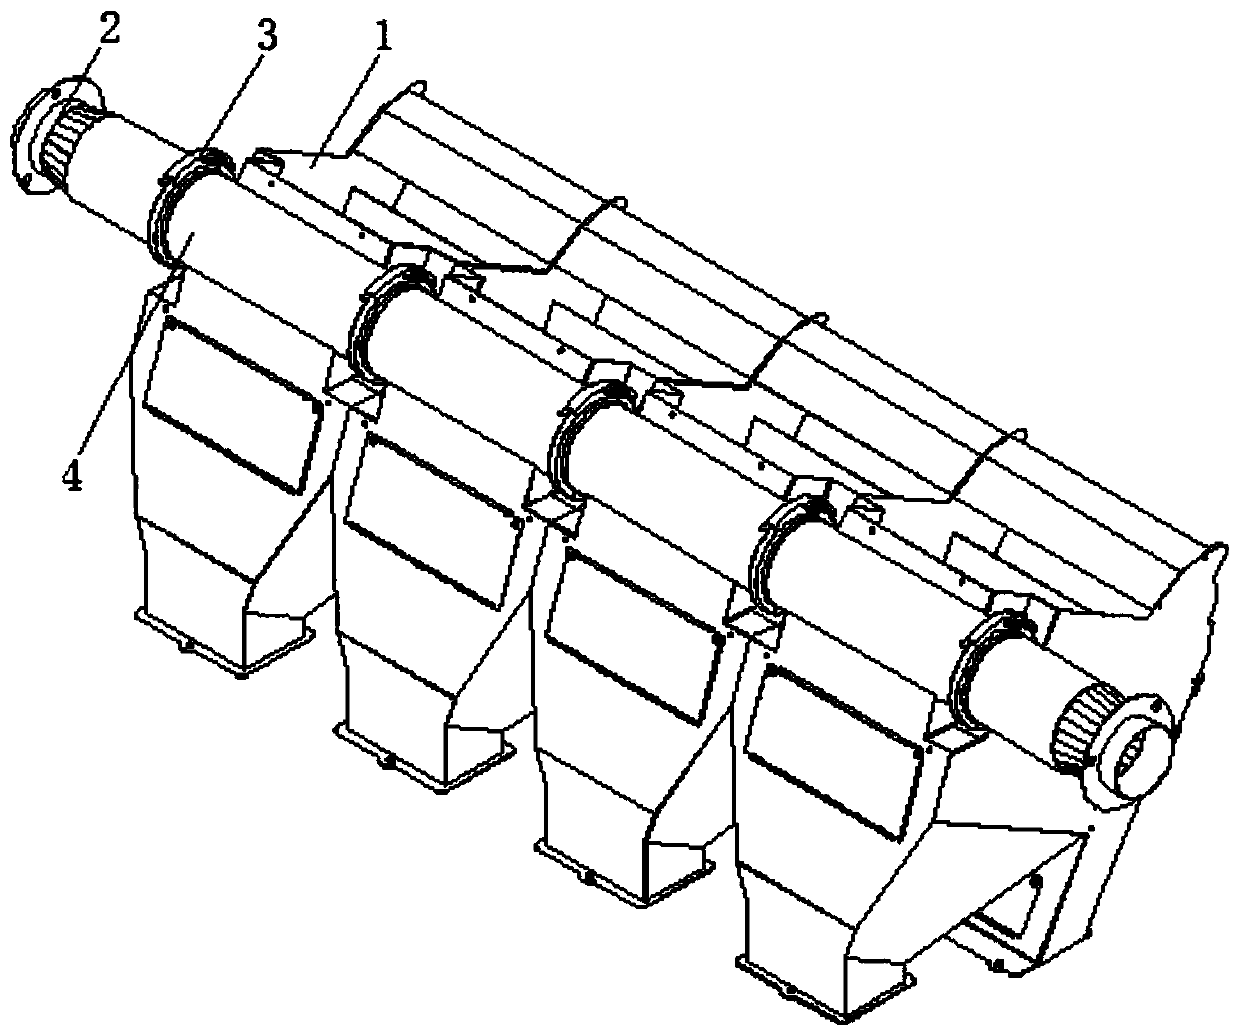 Integrated dust suction discharge hopper assembly